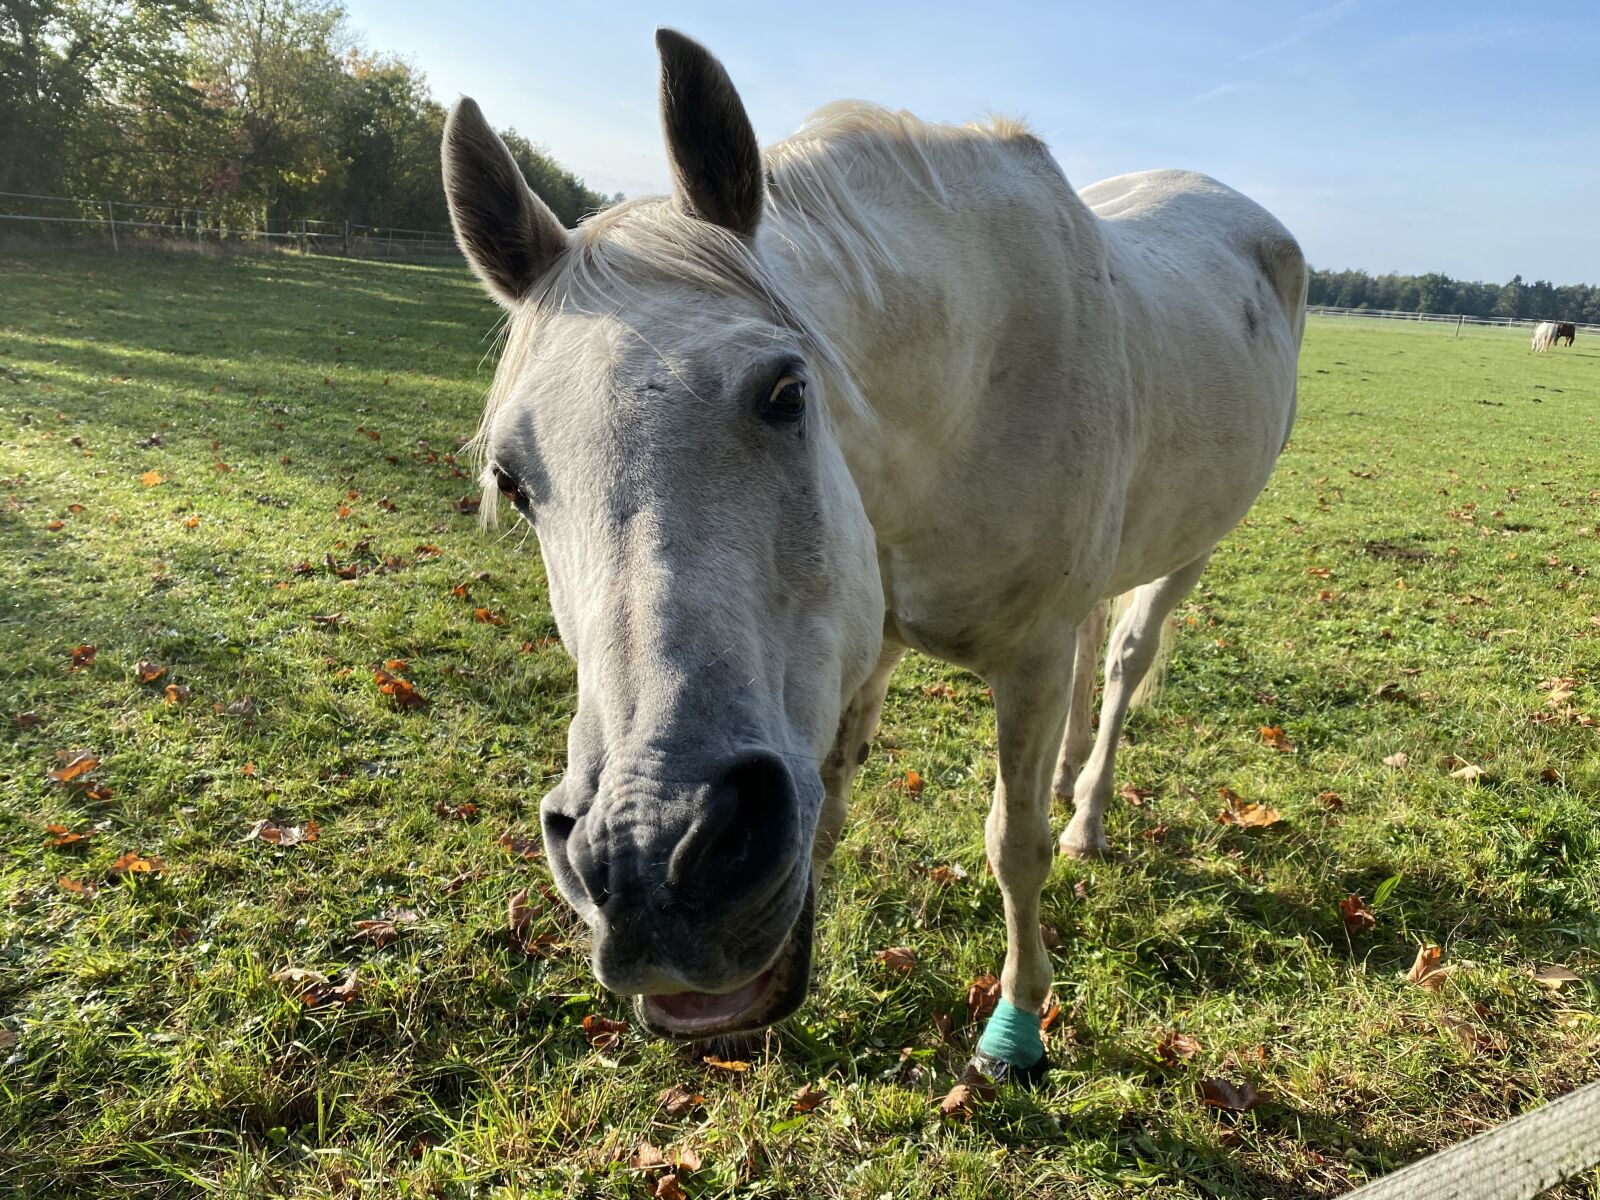 Apple iPhone 11 + iPhone 11 back dual wide camera 4.25mm f/1.8 sample photo. Horse, grass, horses photography